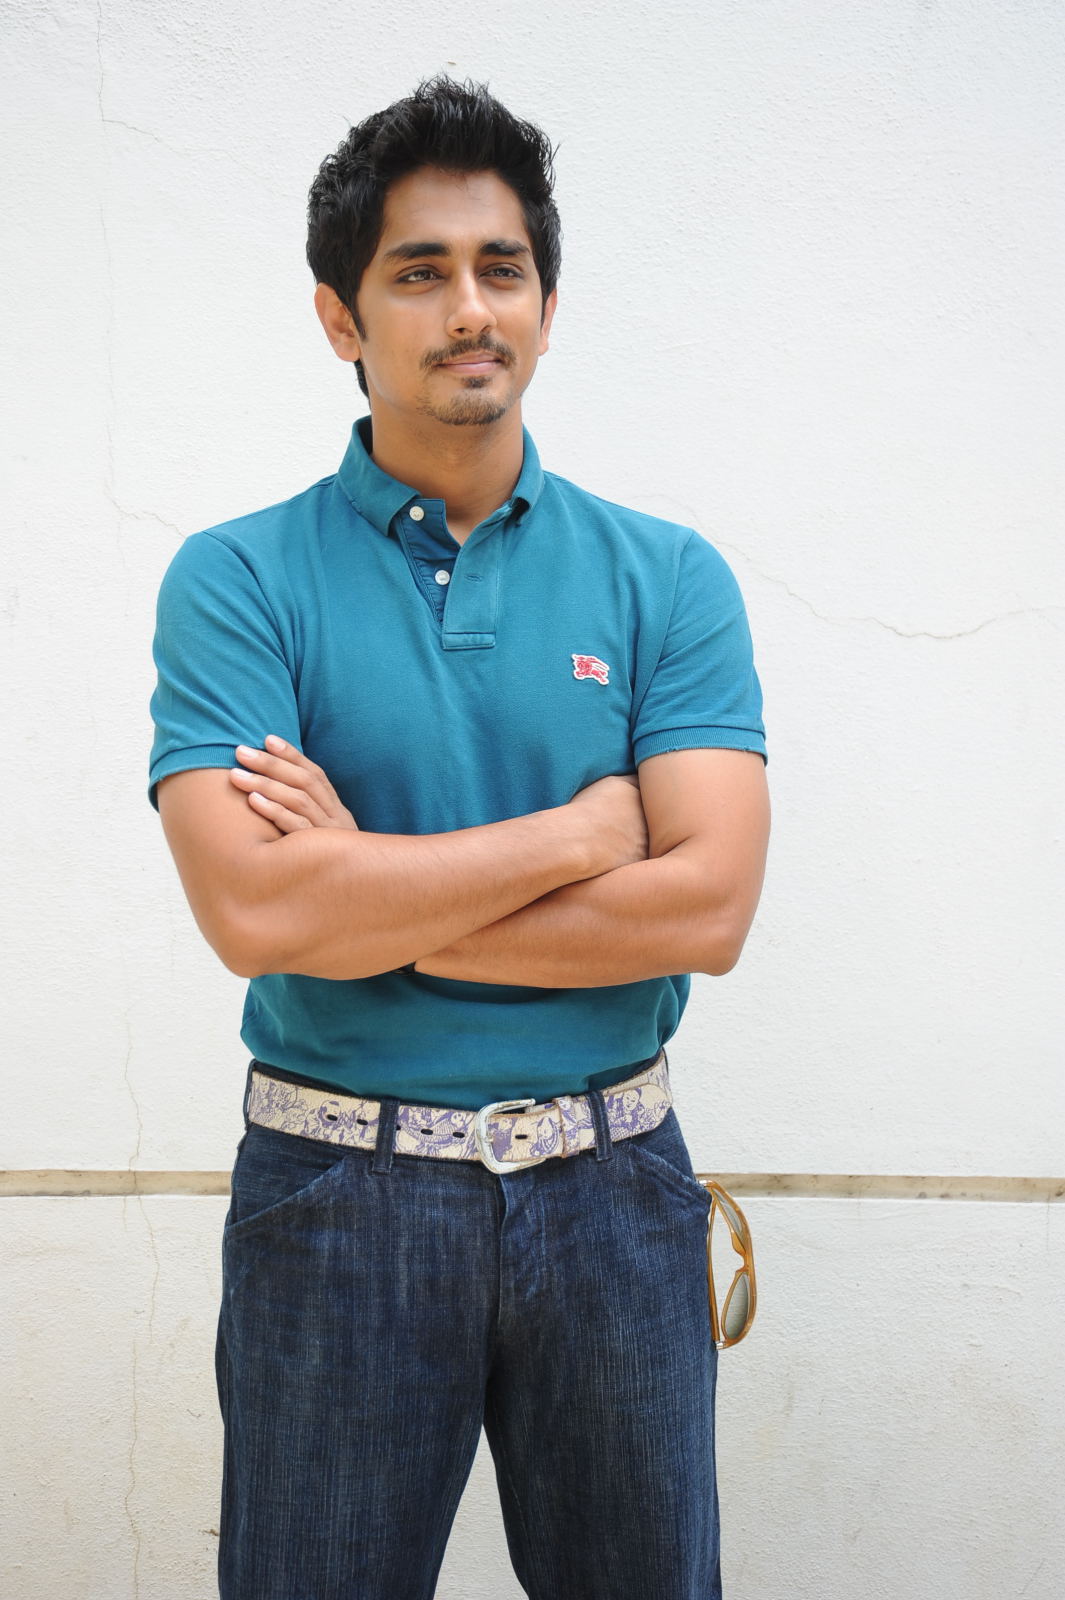 siddharth photos | Picture 41381